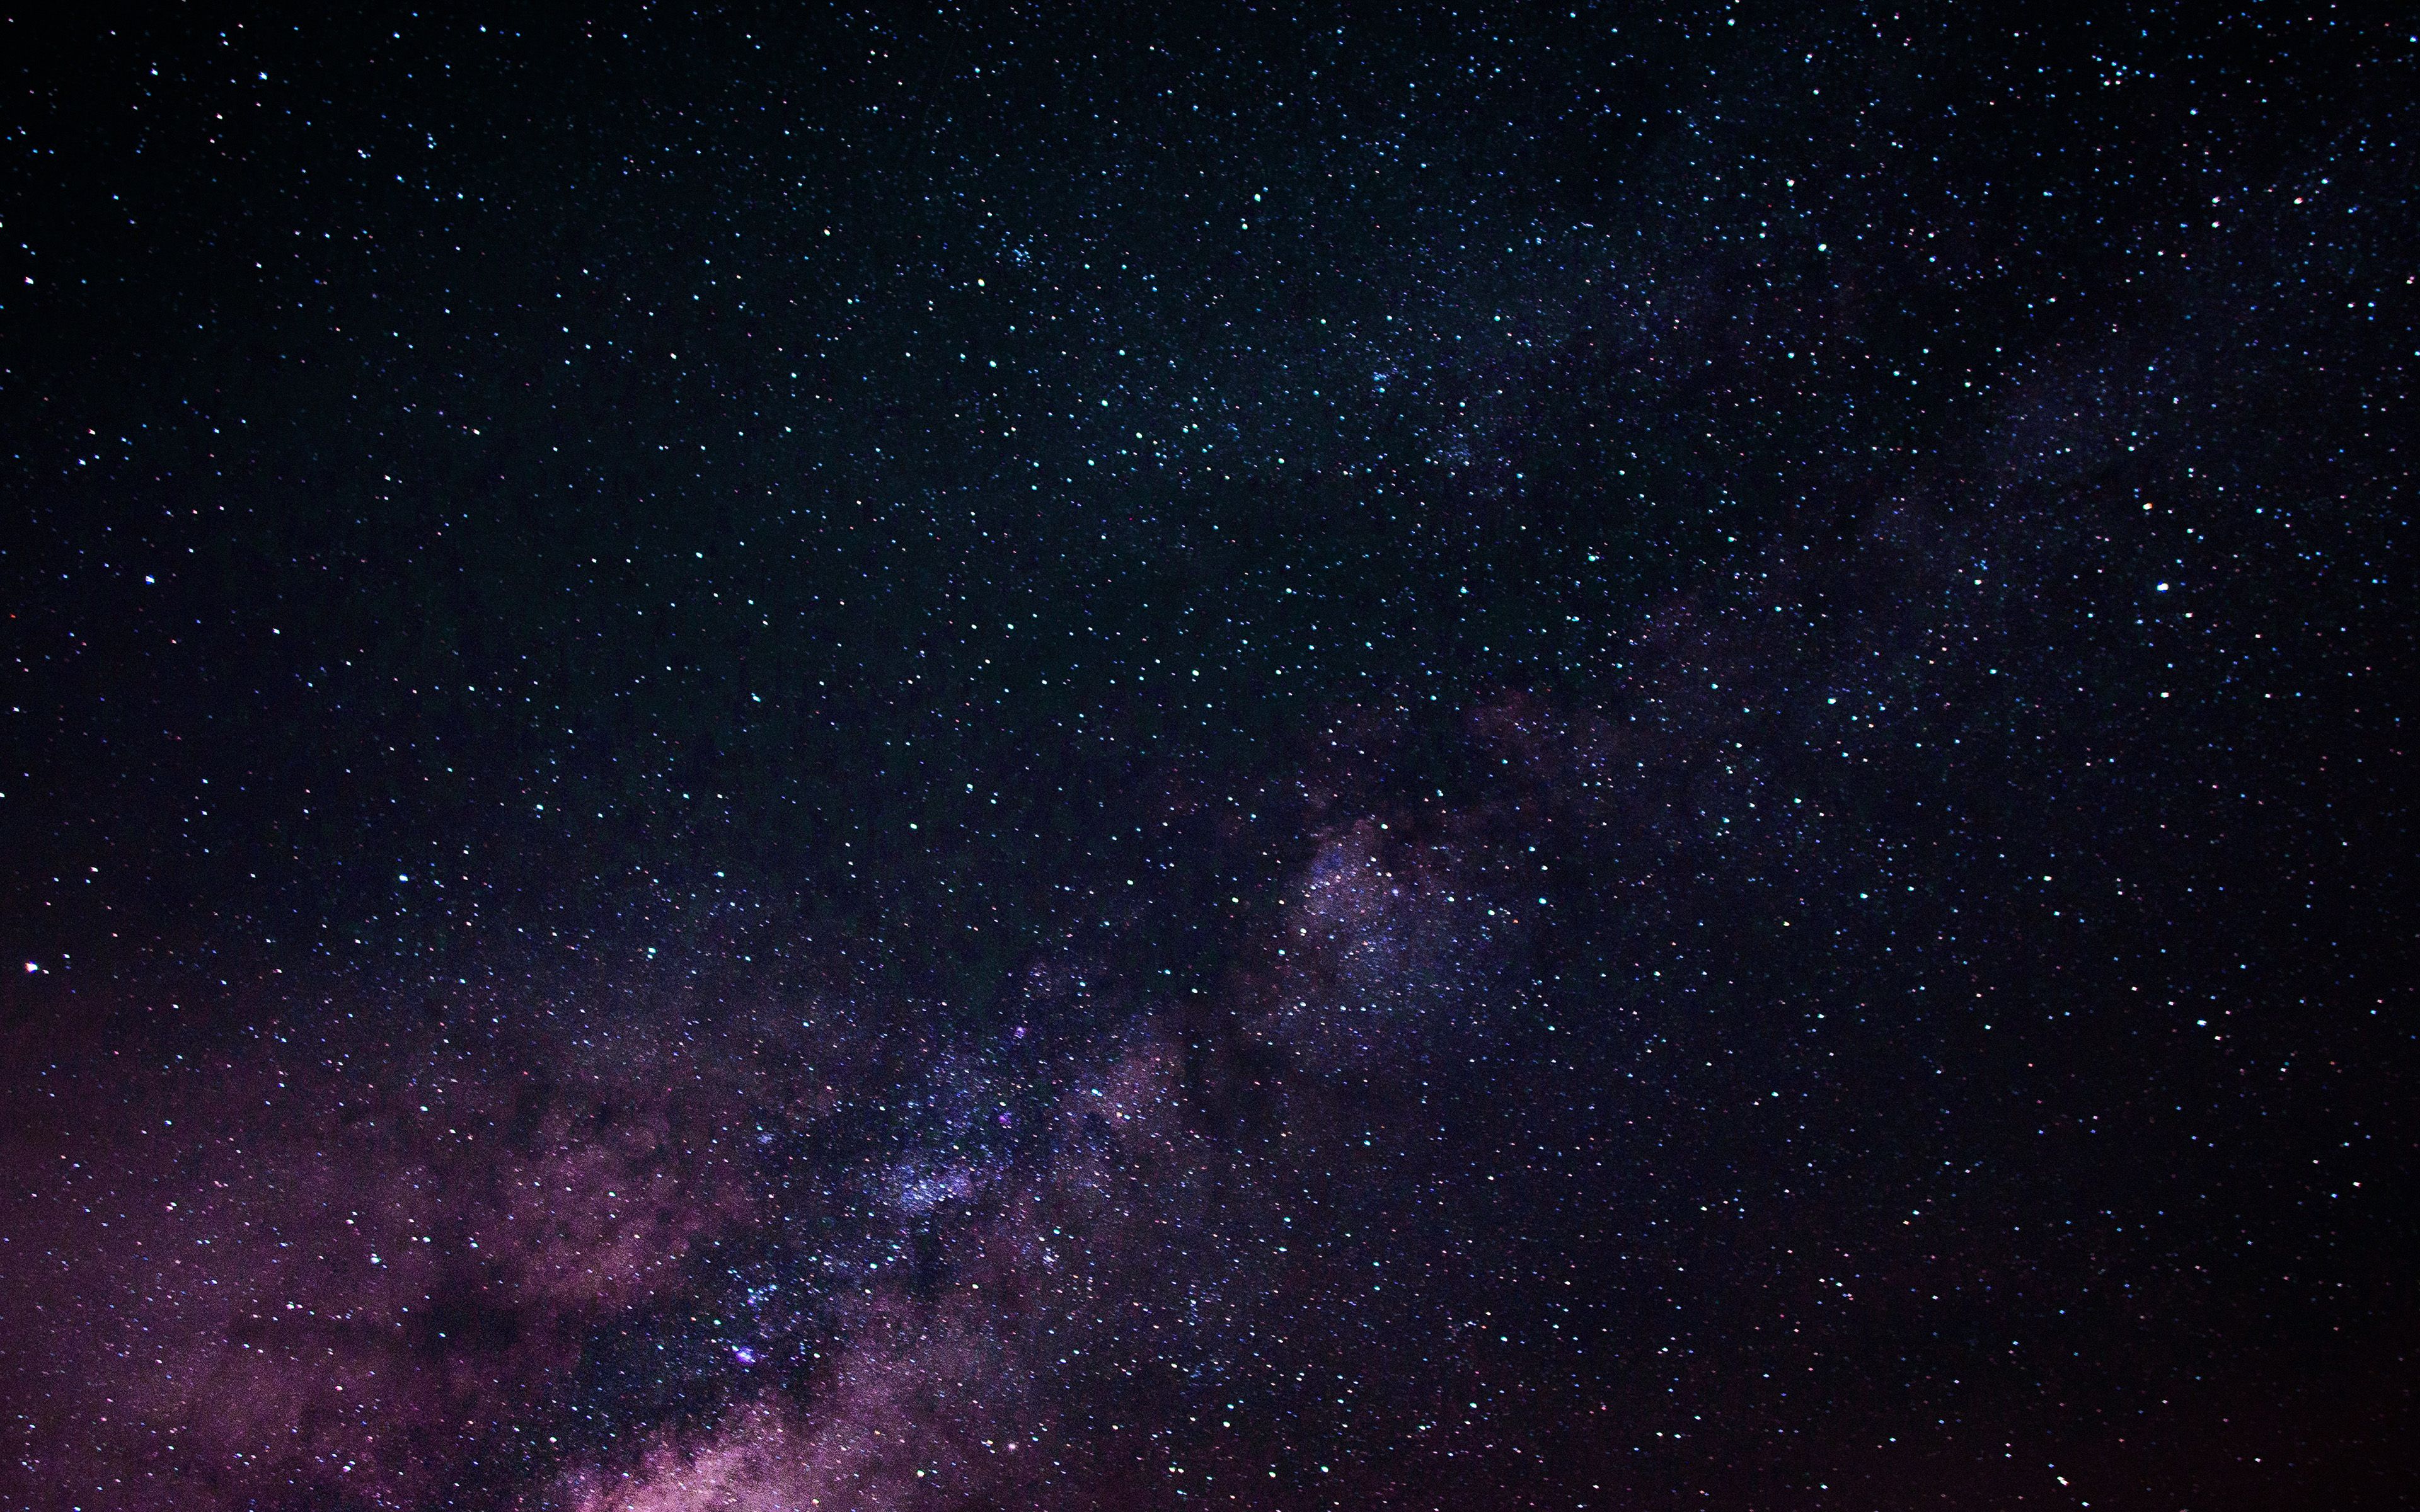 A photo of the night sky with stars and the Milky Way - Night, galaxy, stars